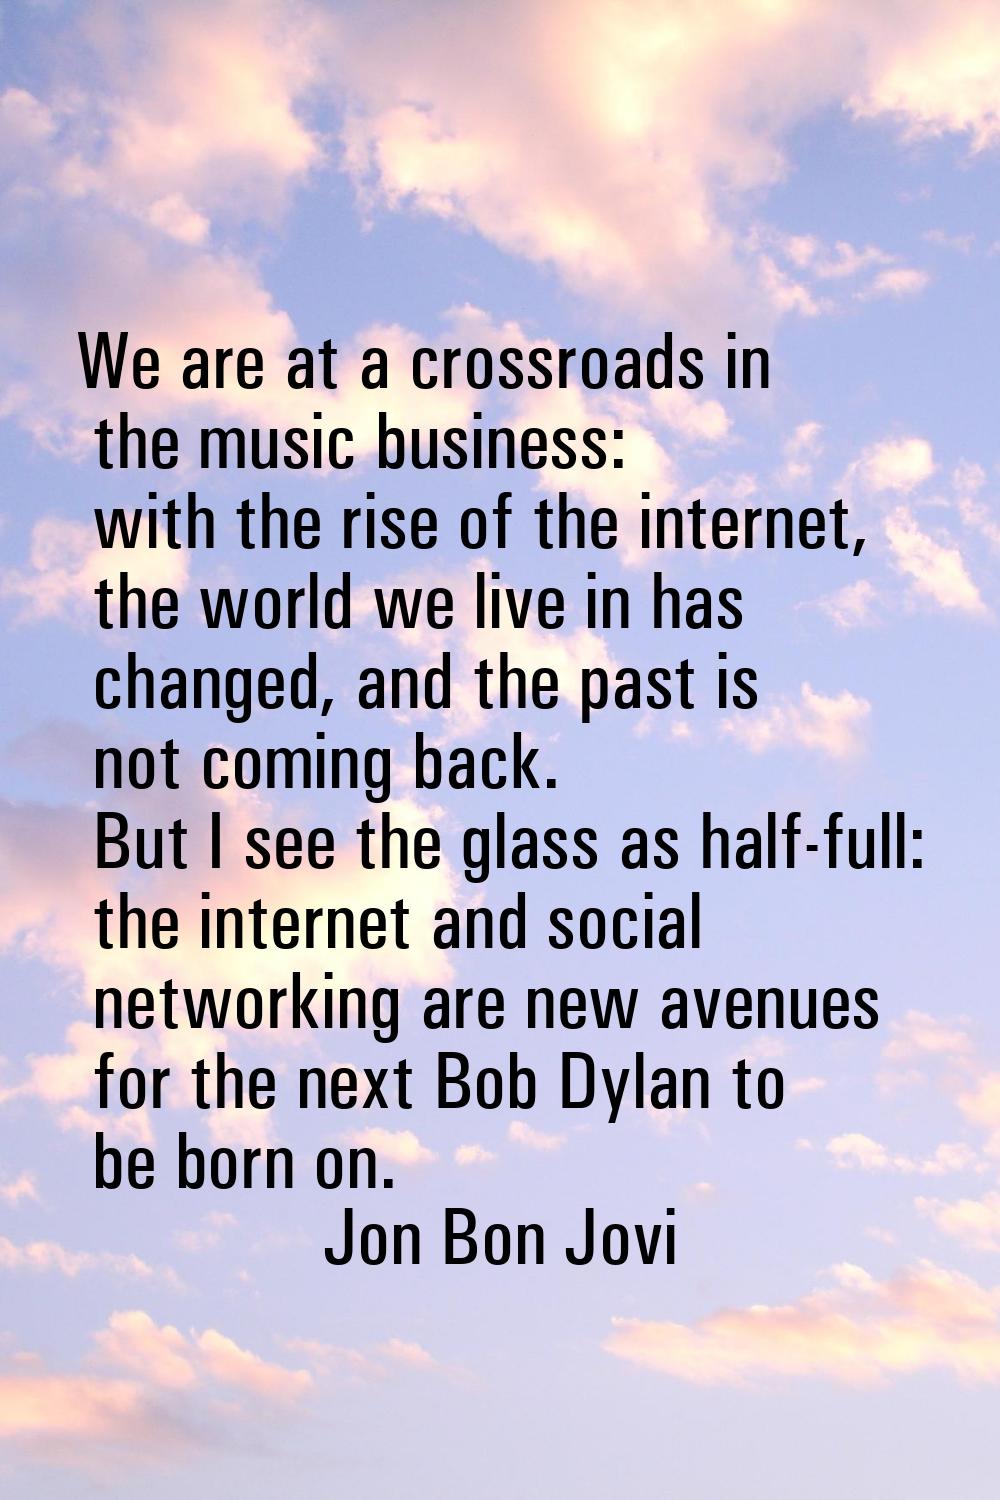 We are at a crossroads in the music business: with the rise of the internet, the world we live in h